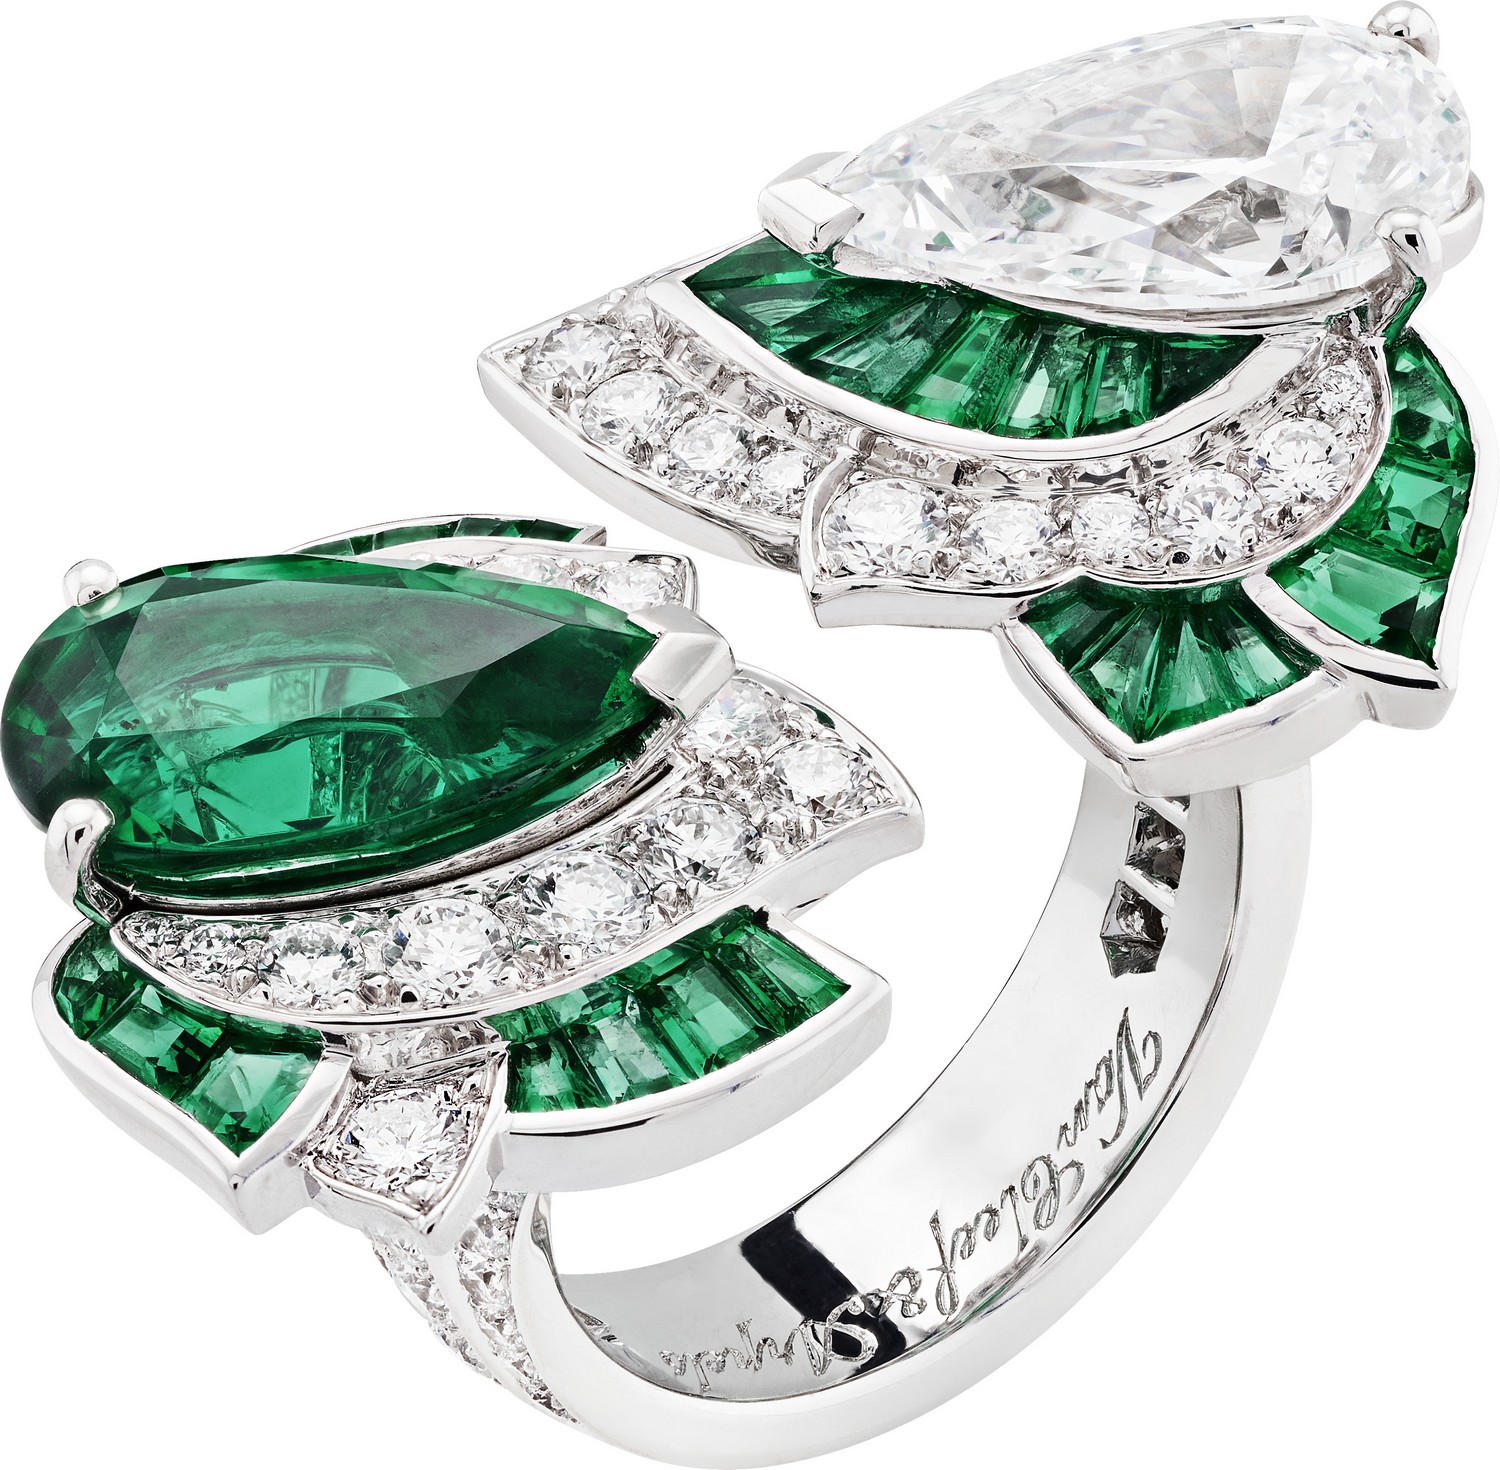 White gold, platinum, round diamonds, baguette-cut emeralds, one pear-shaped D IF diamond of 3.03 carats, one pear-shaped emerald of 3 carats (Zambia).